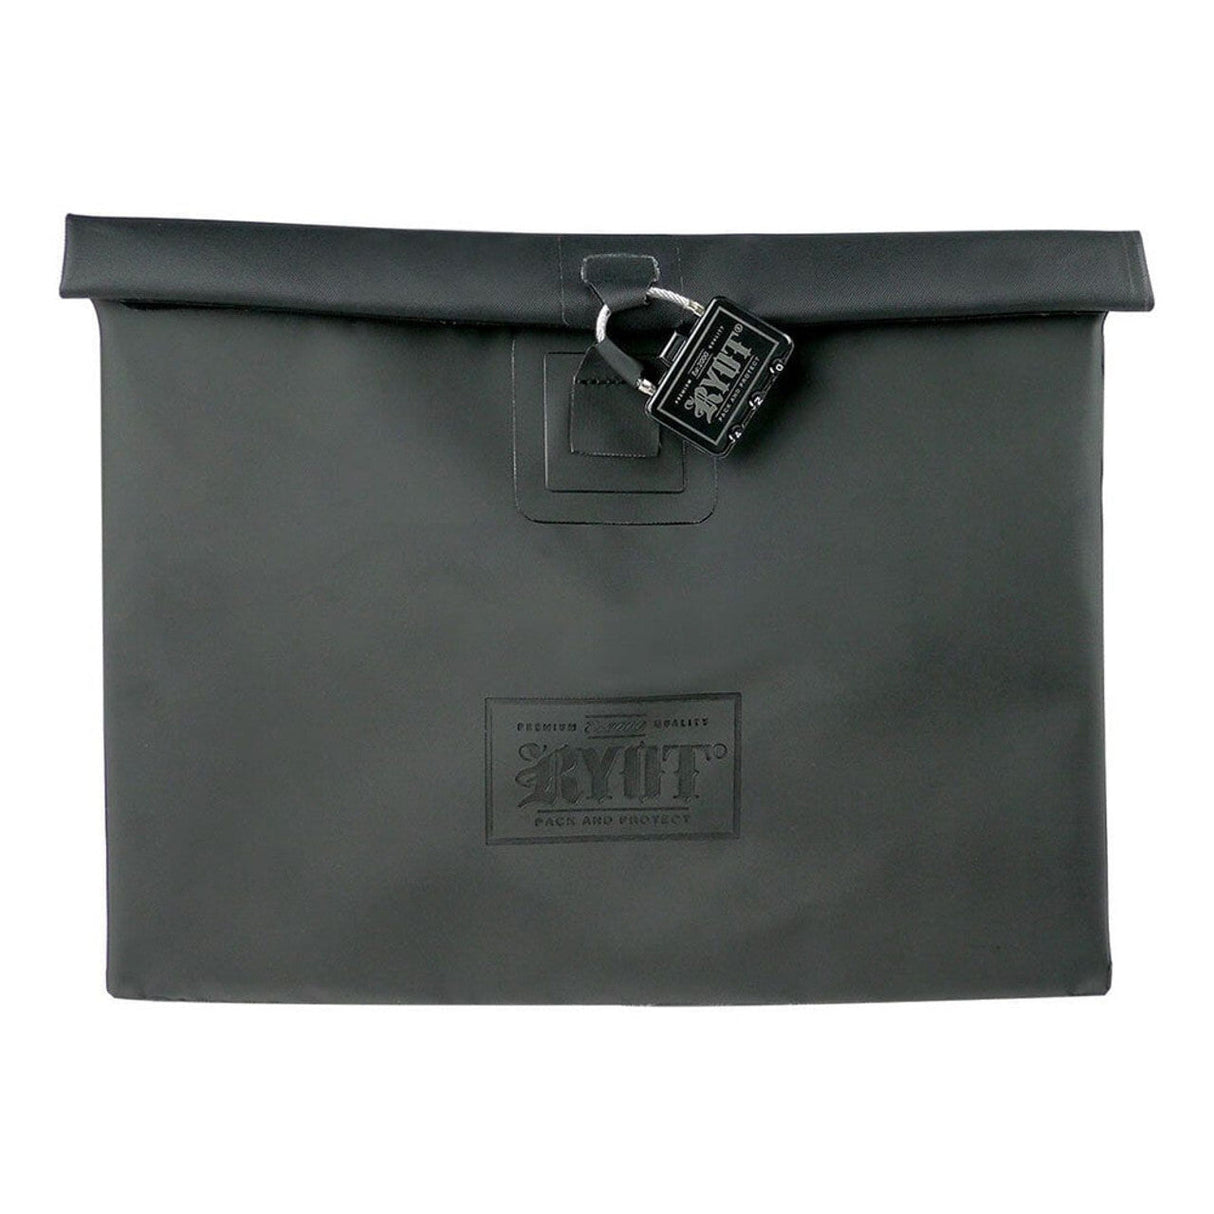 RYOT Flat Pack Bag in black silicone with Removable Smellsafe Carbon Liner and lock, front view